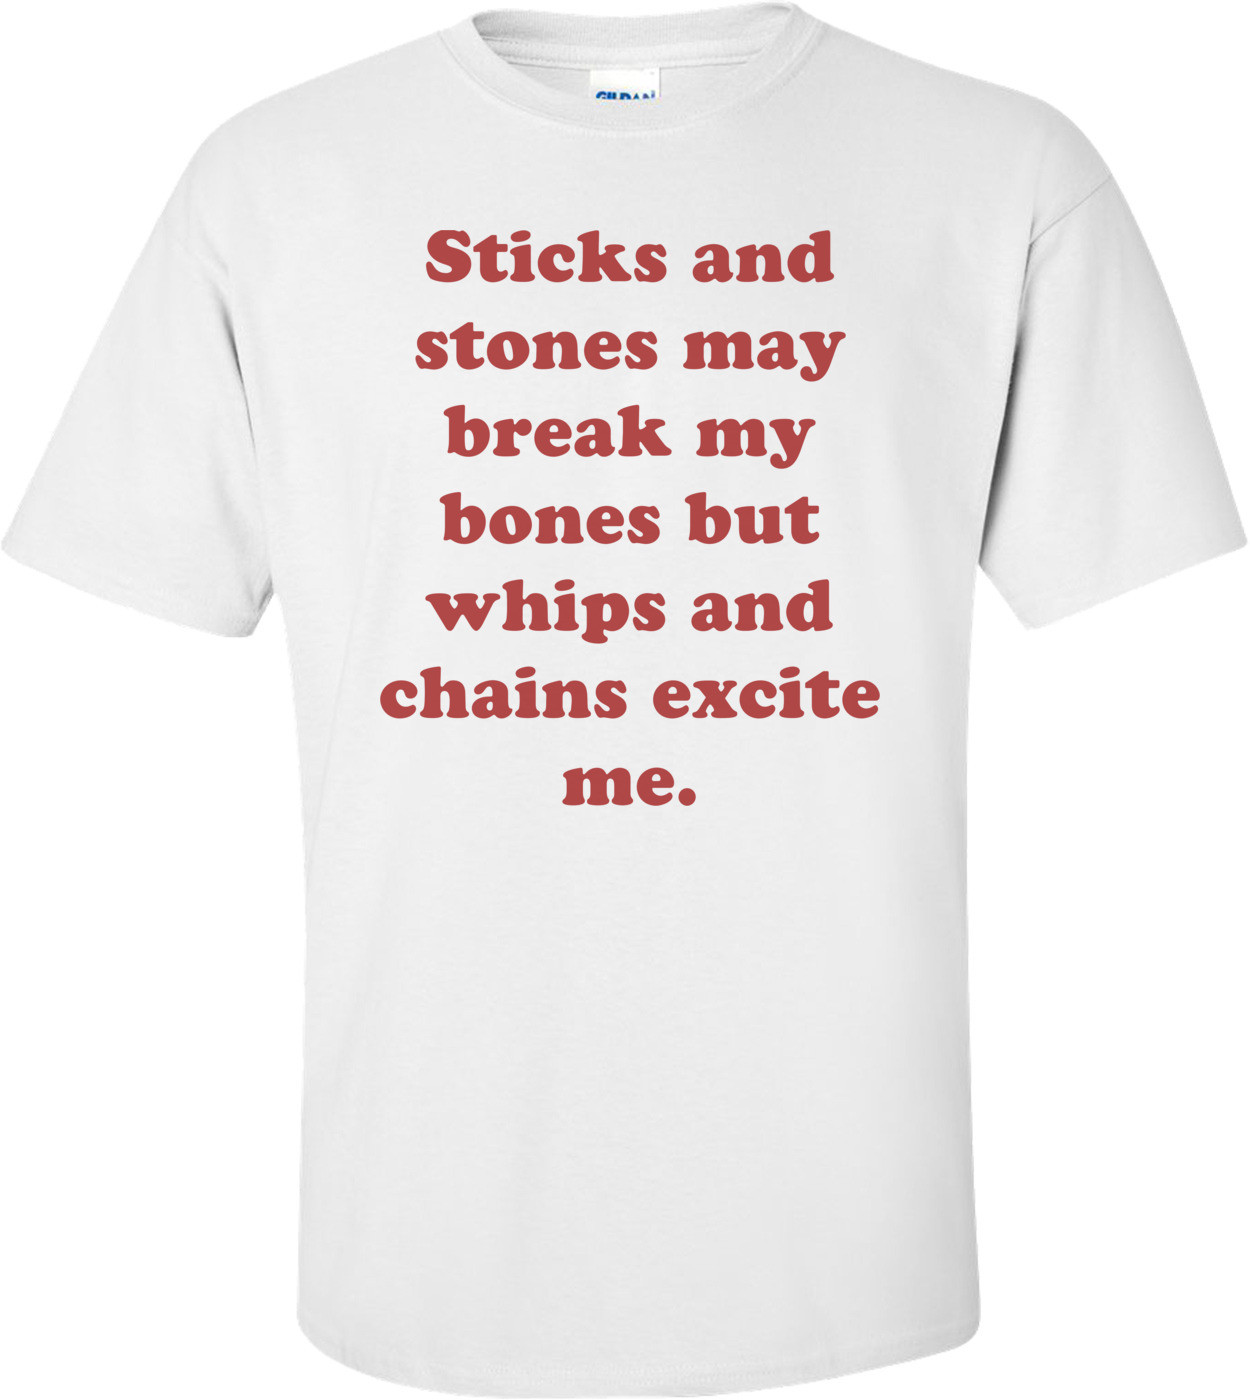 Sticks and stones may break my bones but whips and chains excite me. Shirt